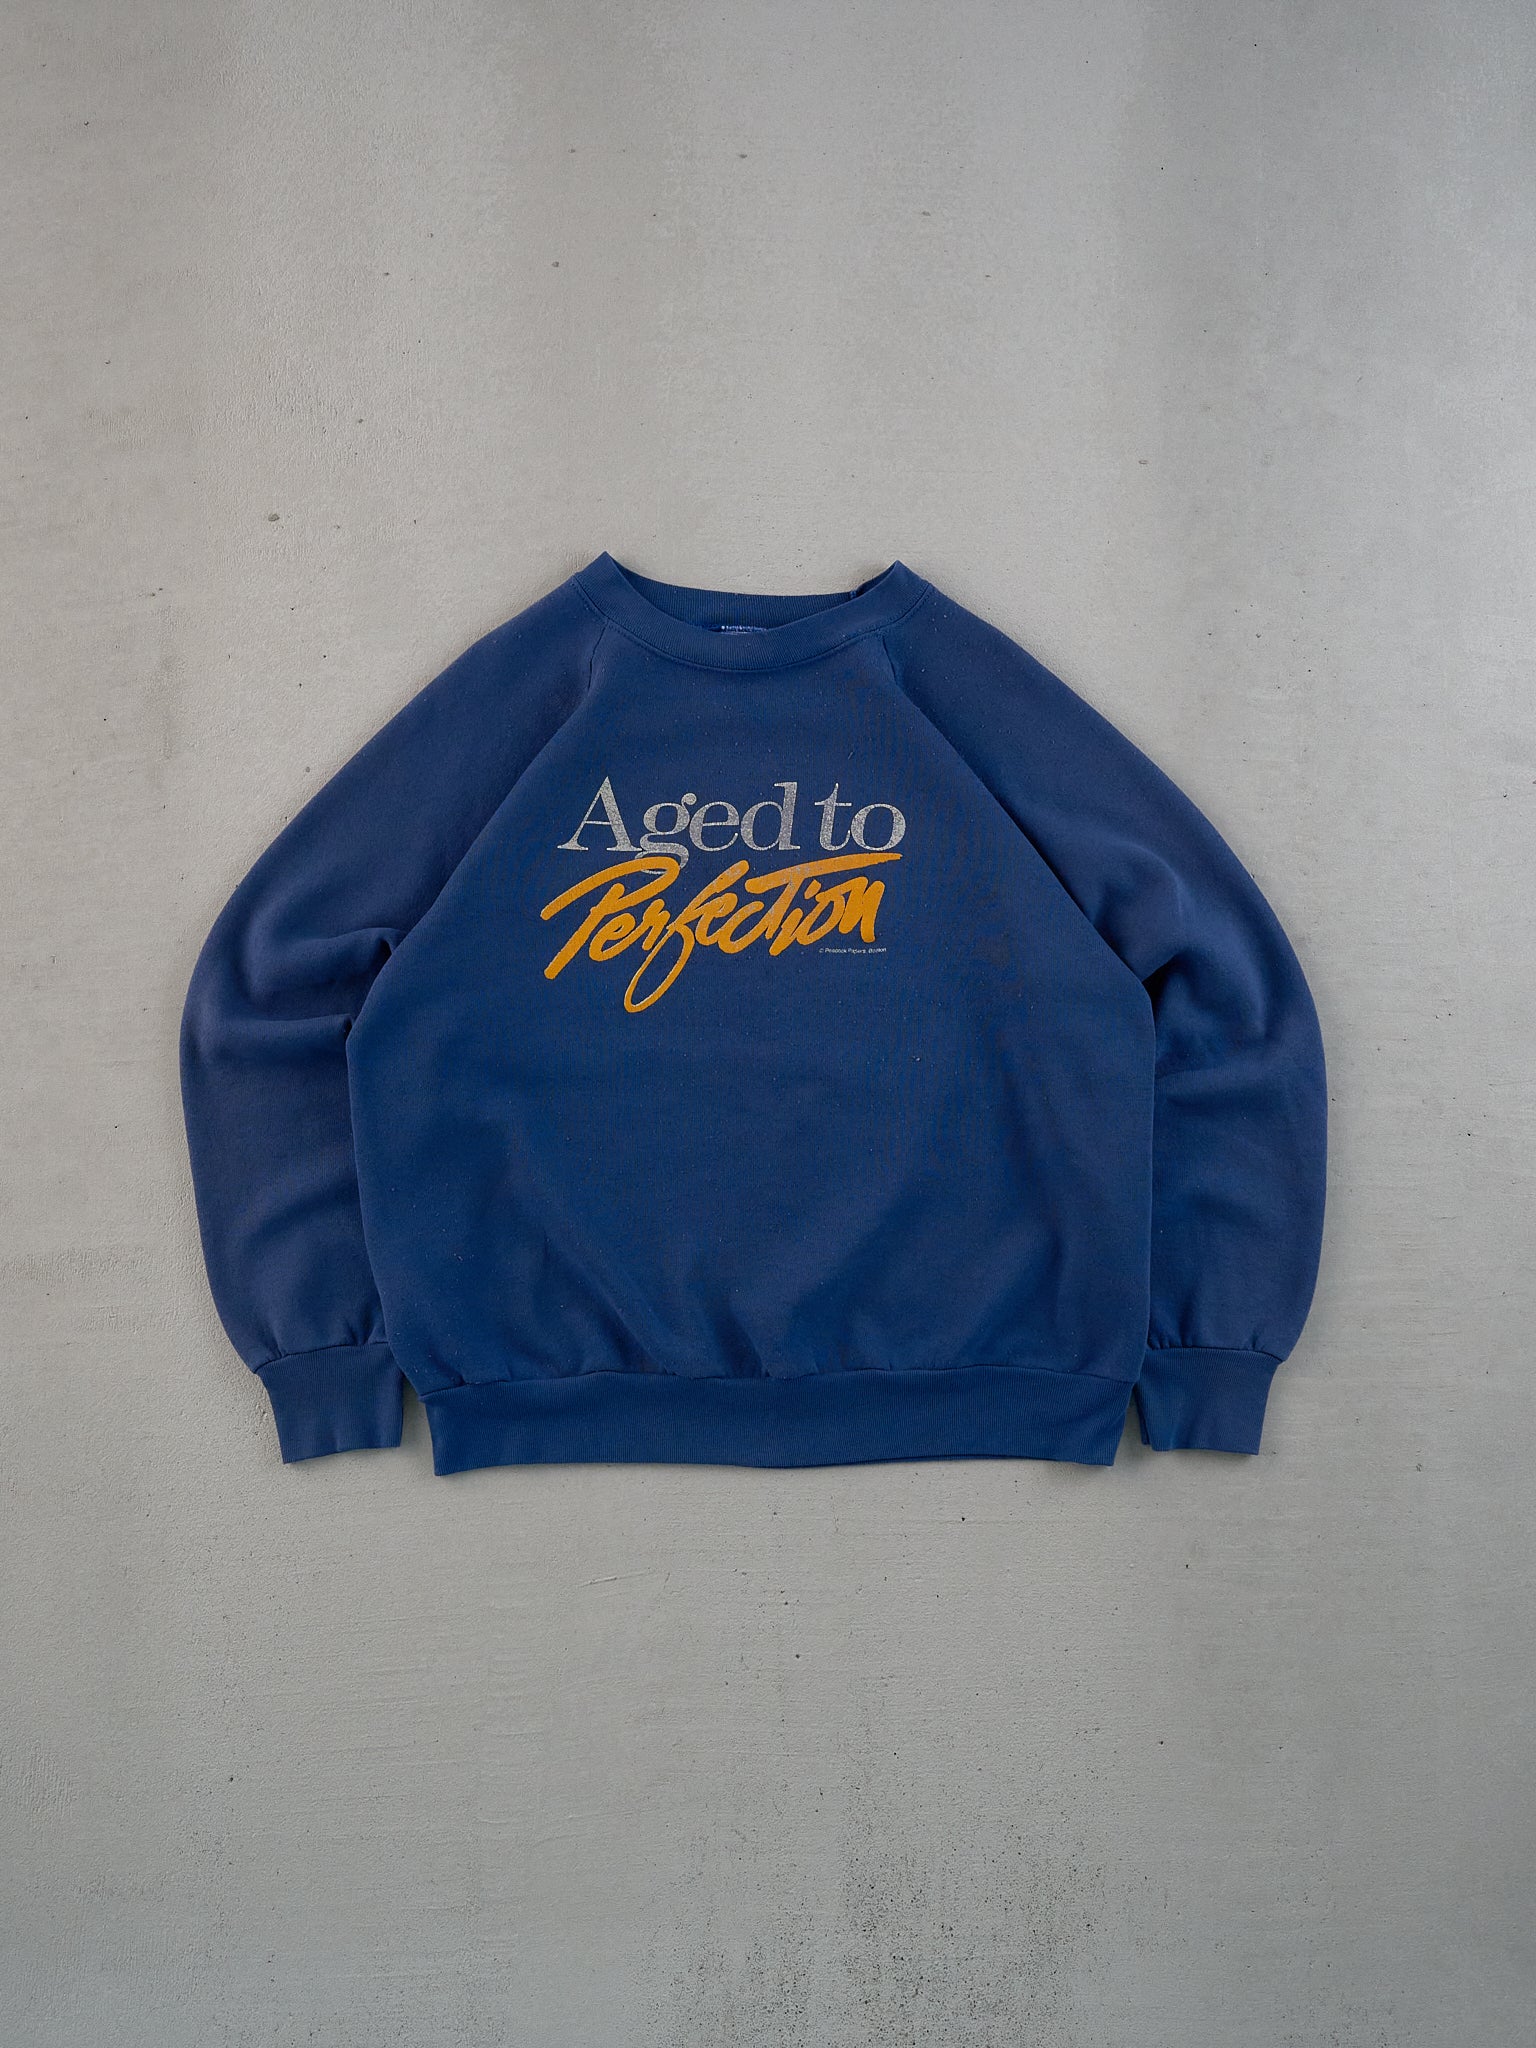 Vintage 90s Light Navy Blue "Age to Perfection" Graphic Crewneck (M)